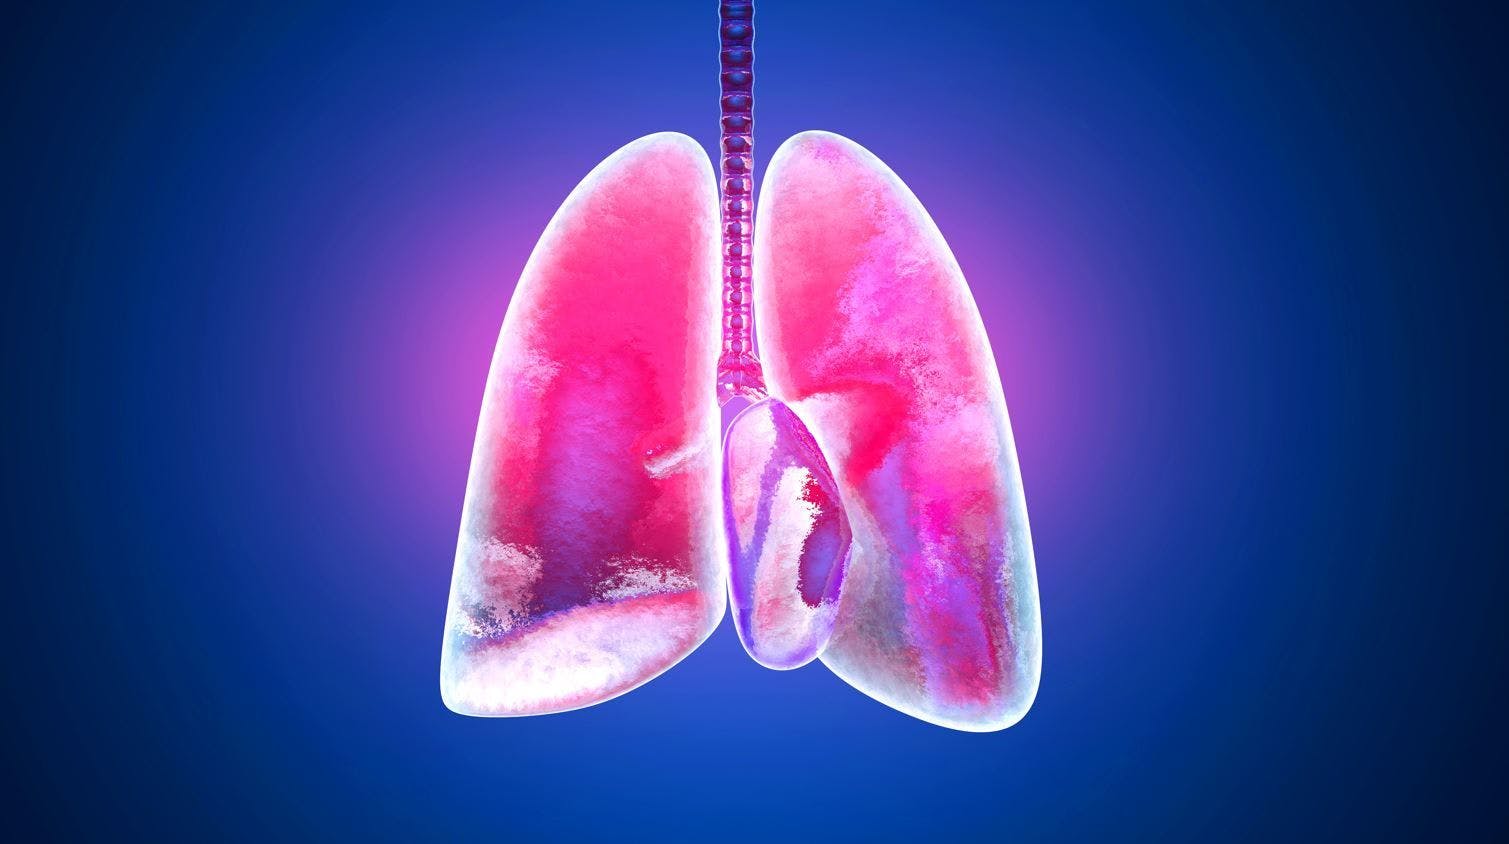 Fixed-dose Albuterol/Budesonide Superior to Components for Asthma in Dual Phase 3 Trials 